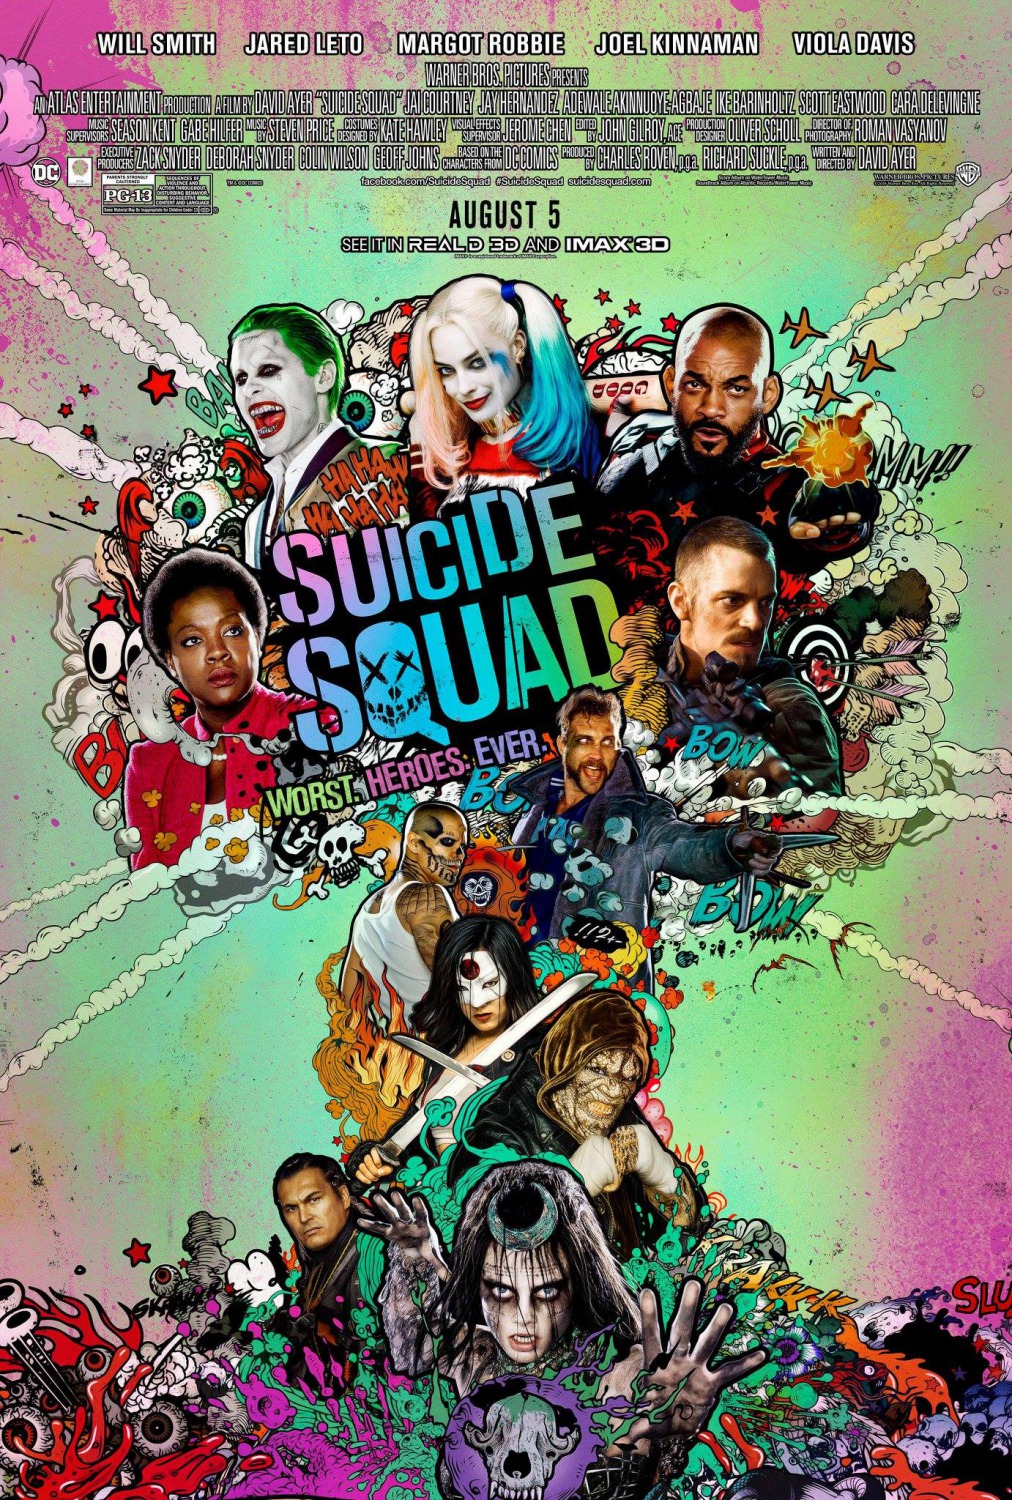 Extra Large Movie Poster Image for Suicide Squad (#24 of 49)